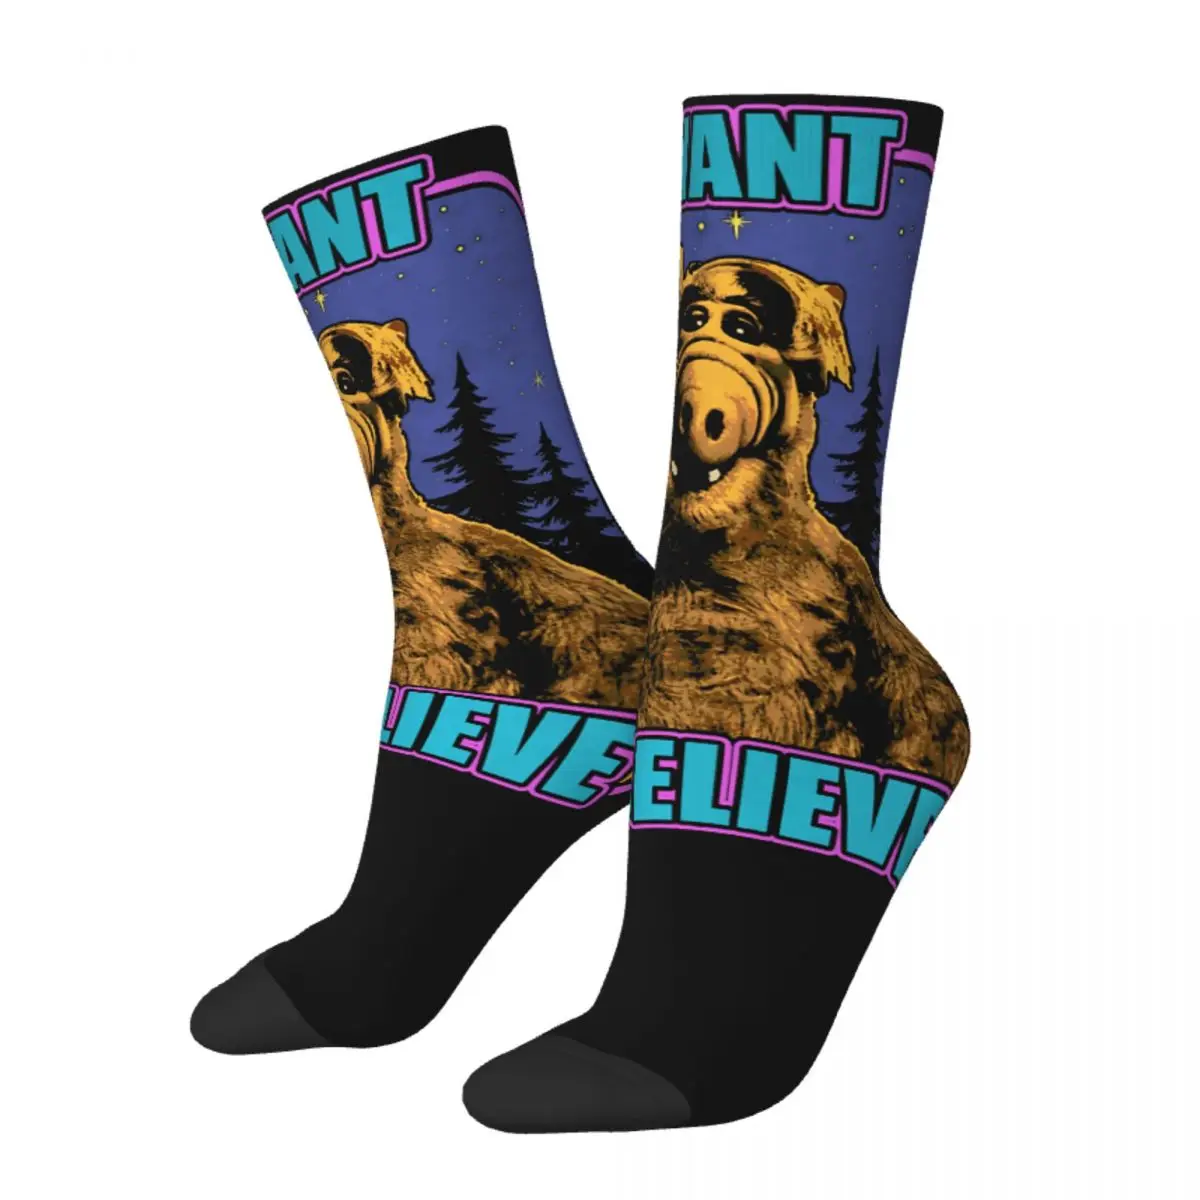 

Hip Hop Vintage I Want To Believe Crazy Men's Socks Unisex ALF The Animated Series Harajuku Seamless Printed Crew Sock Boys Gift